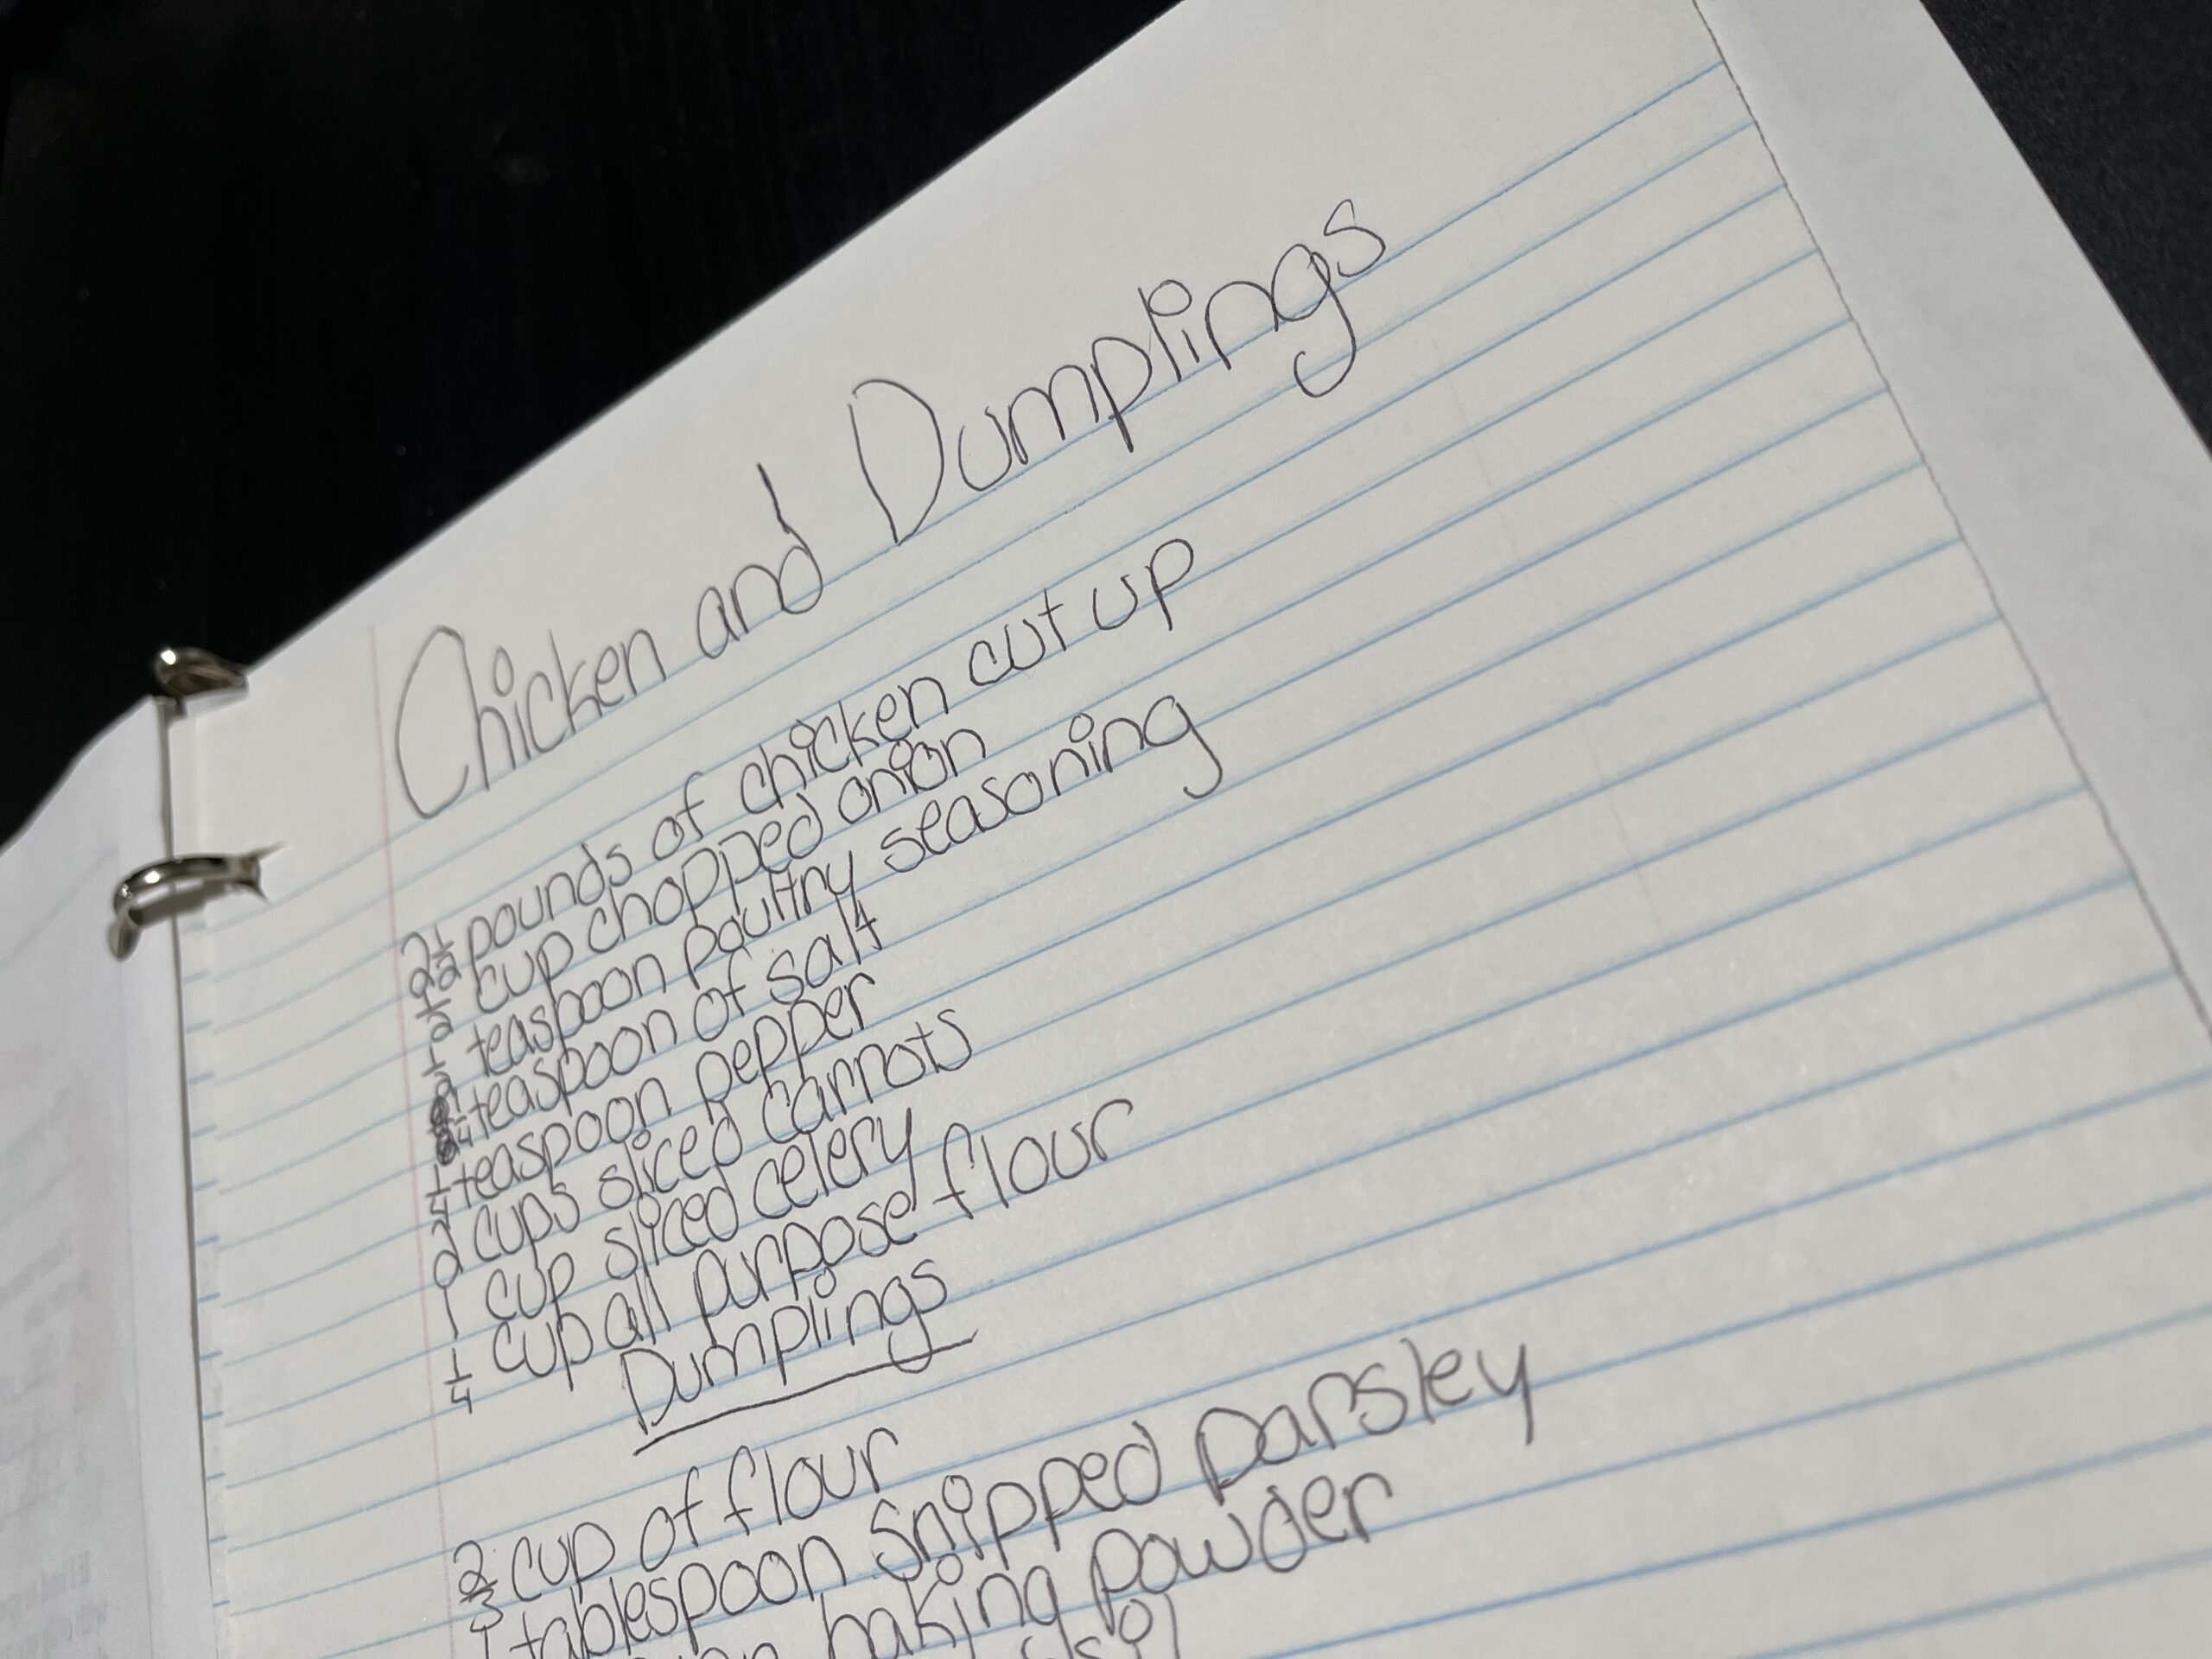 Chicken and dumplings recipe on lined paper